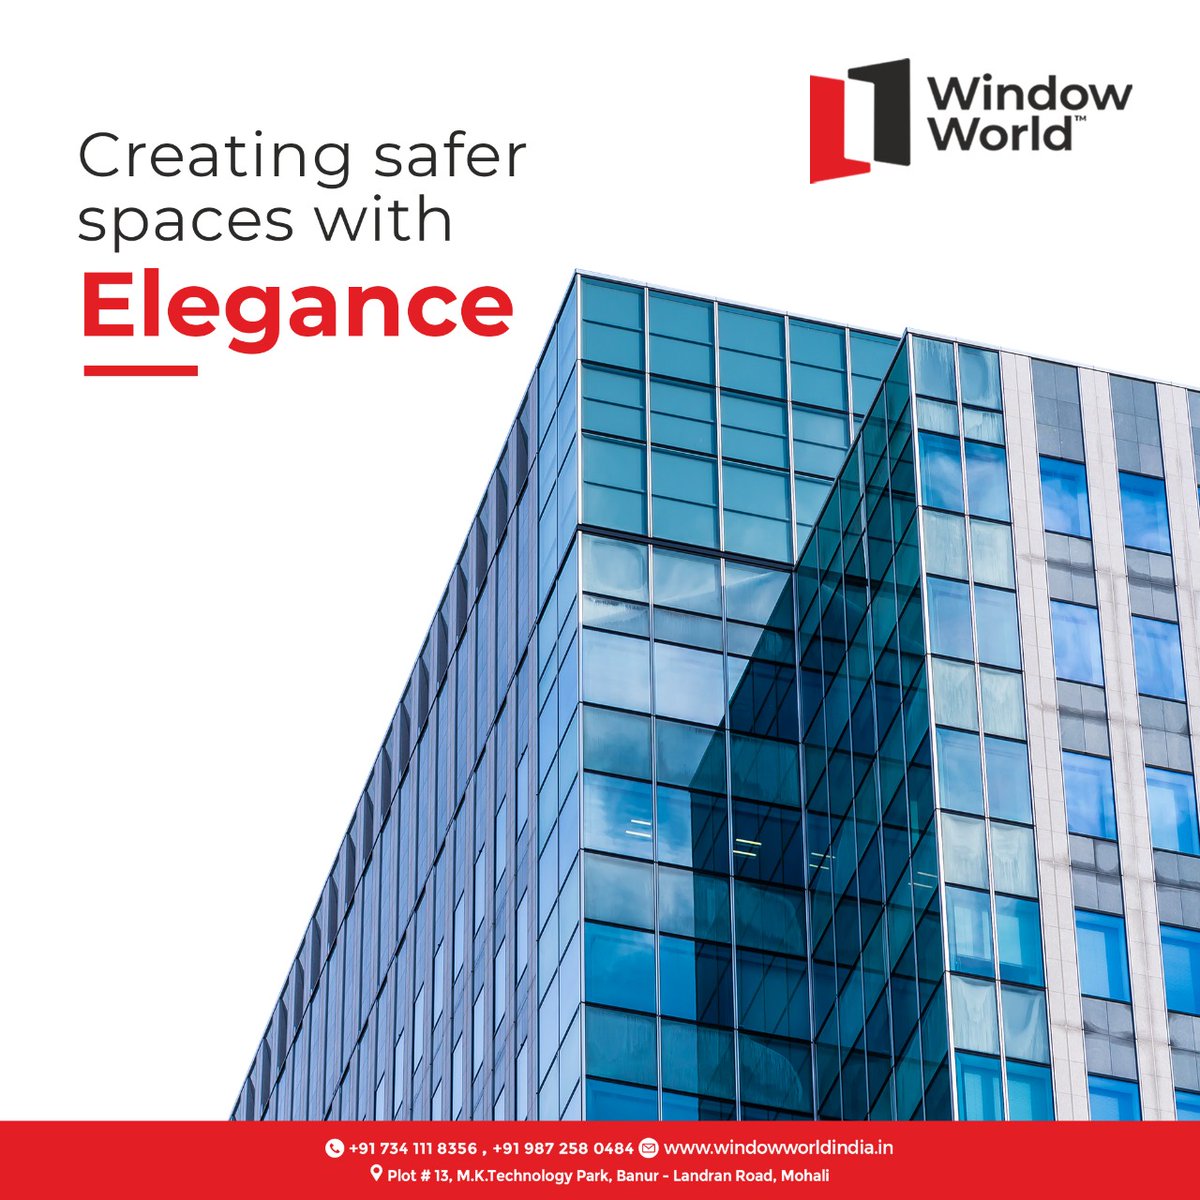 Beautify your commercial space and living with the curtain wall system by Window World!!

Explore more products:
windowworldindia.in

#windowworld #windowsforlife #curtainwallsystem #curtainwalls #easilymovablewindows #interiordesign #doorsandwindows #glass #architectdaily